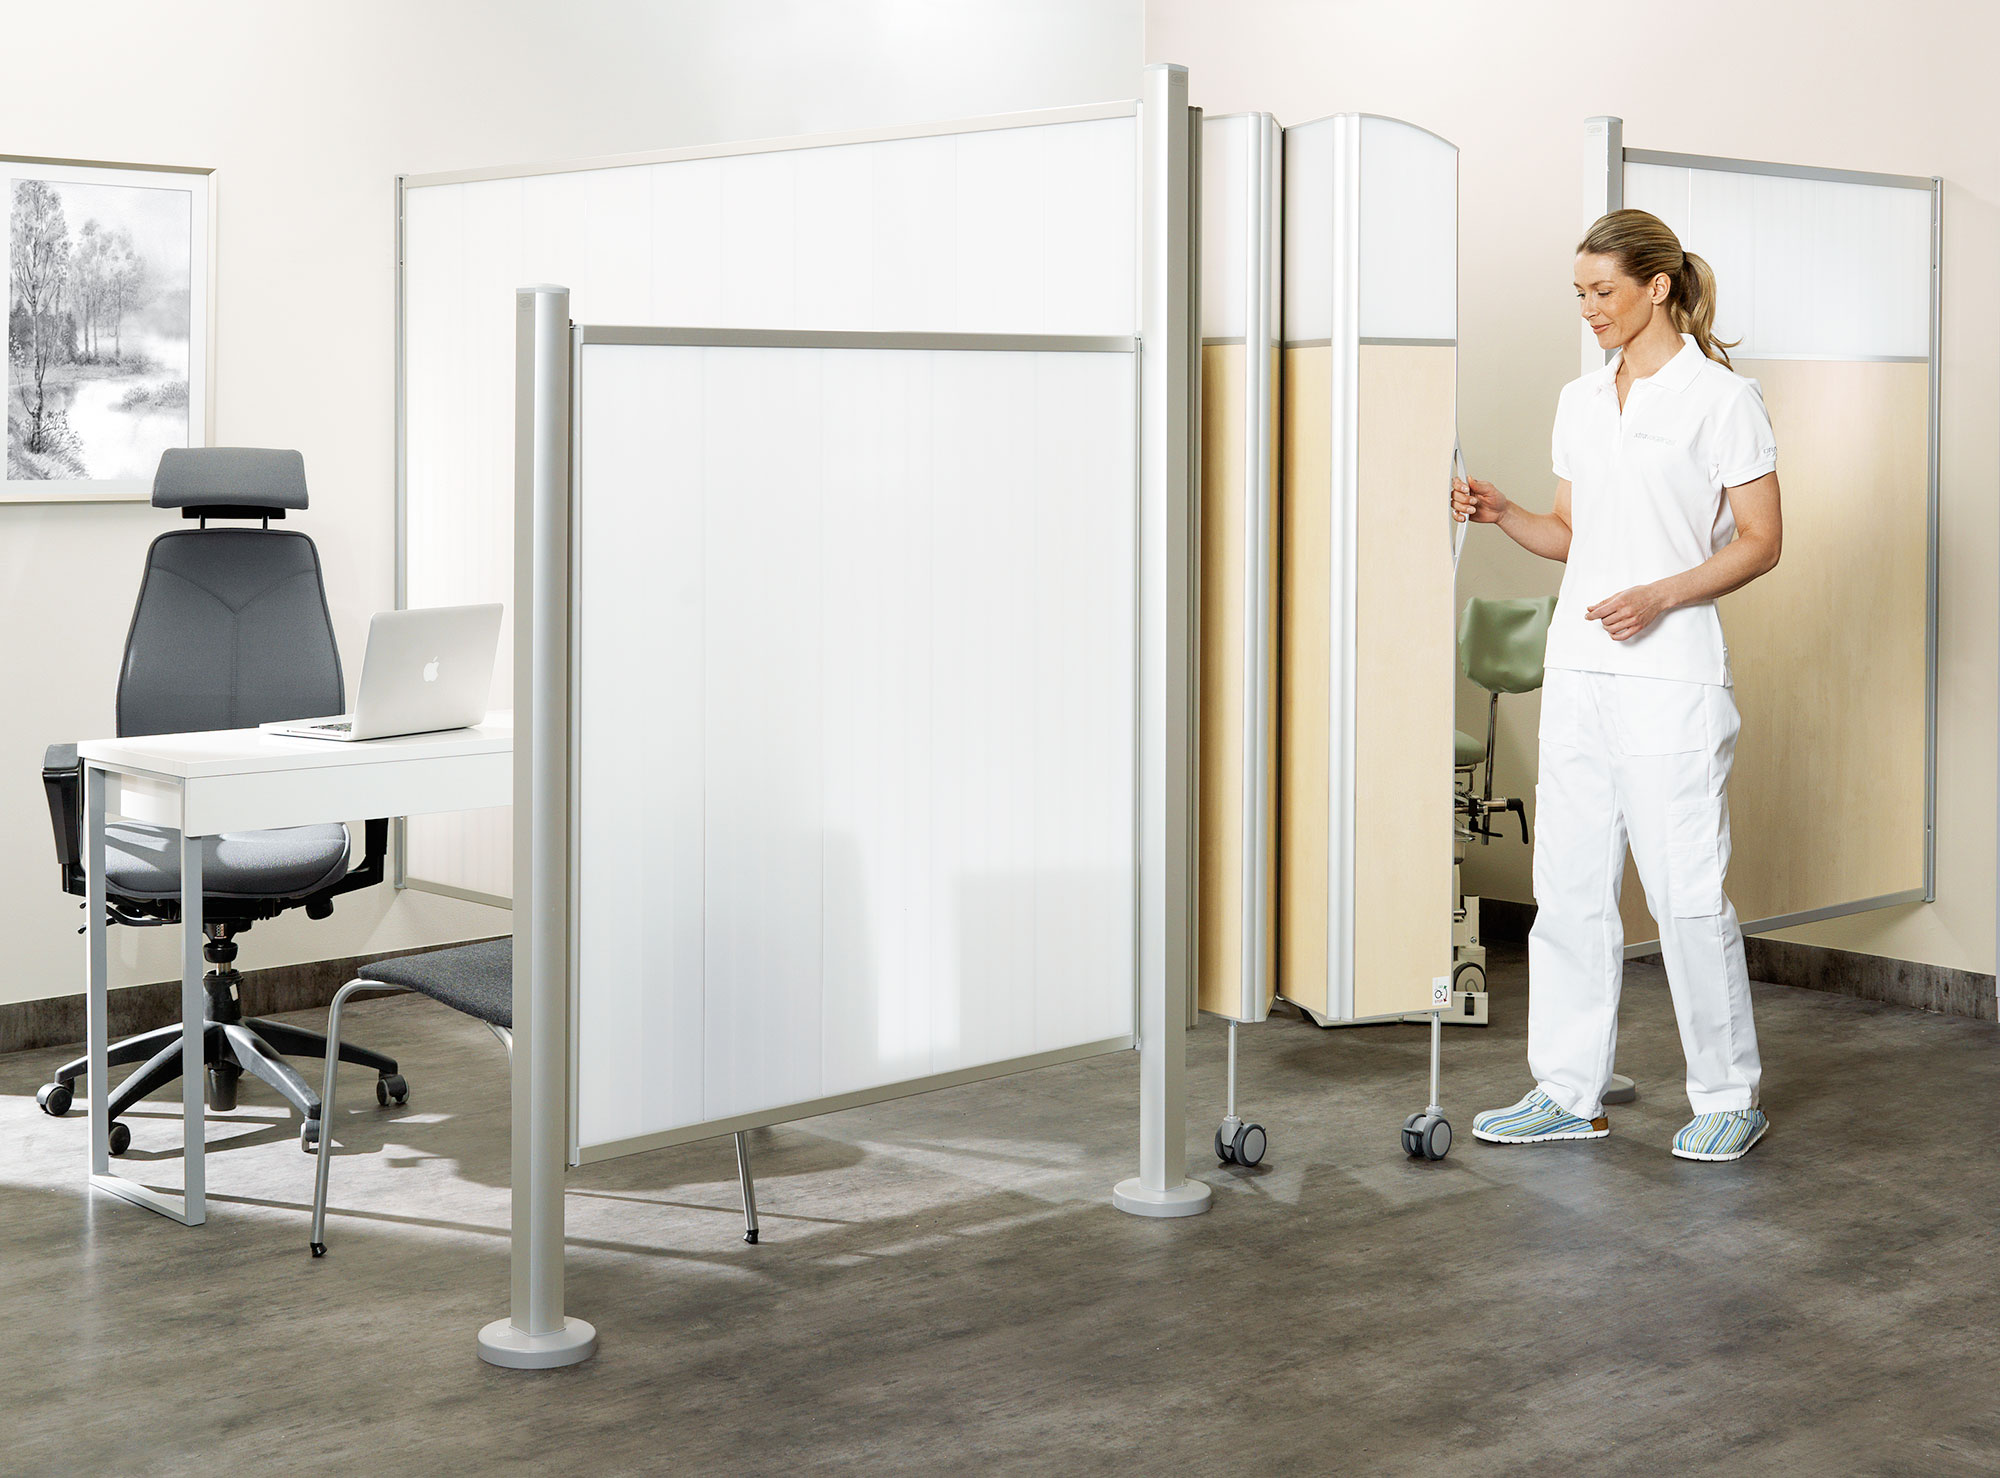 Silentia medical room dividers – create your own solution